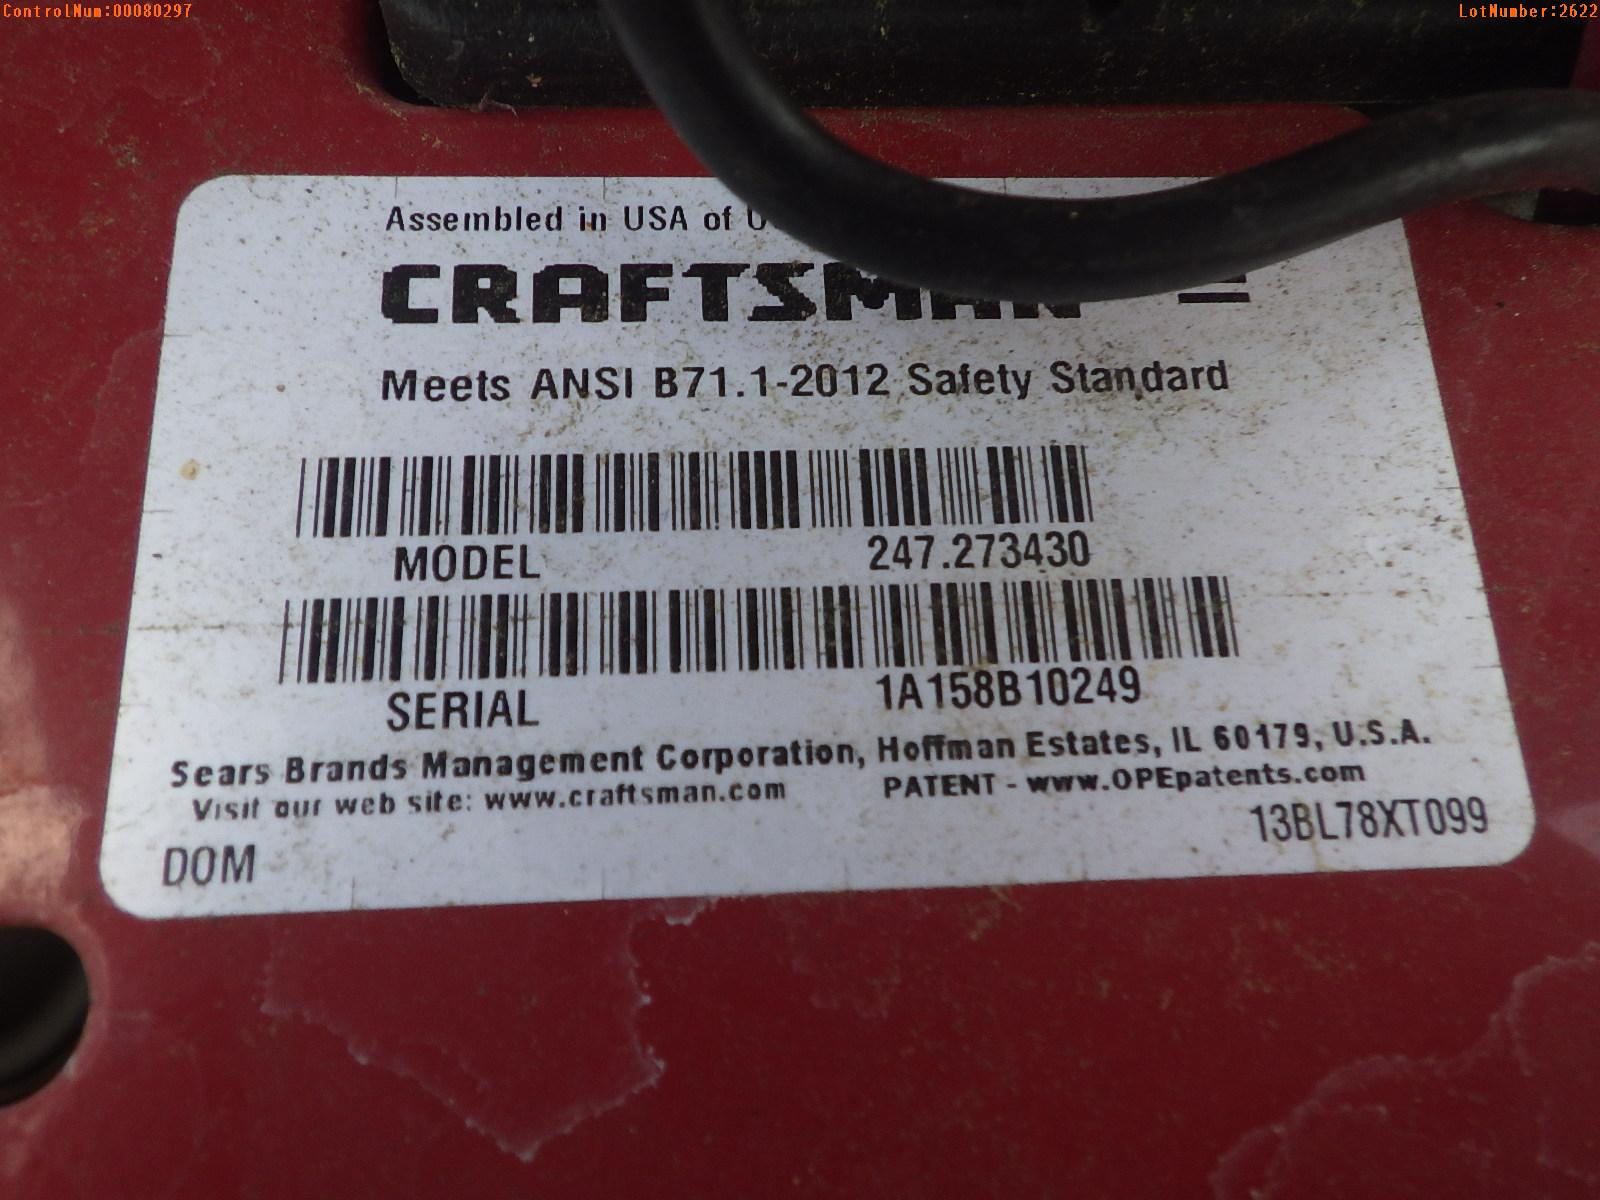 5-02622 (Equip.-Mower)  Seller:Private/Dealer CRAFTSMAN T1700 RIDING LAWN MOWER